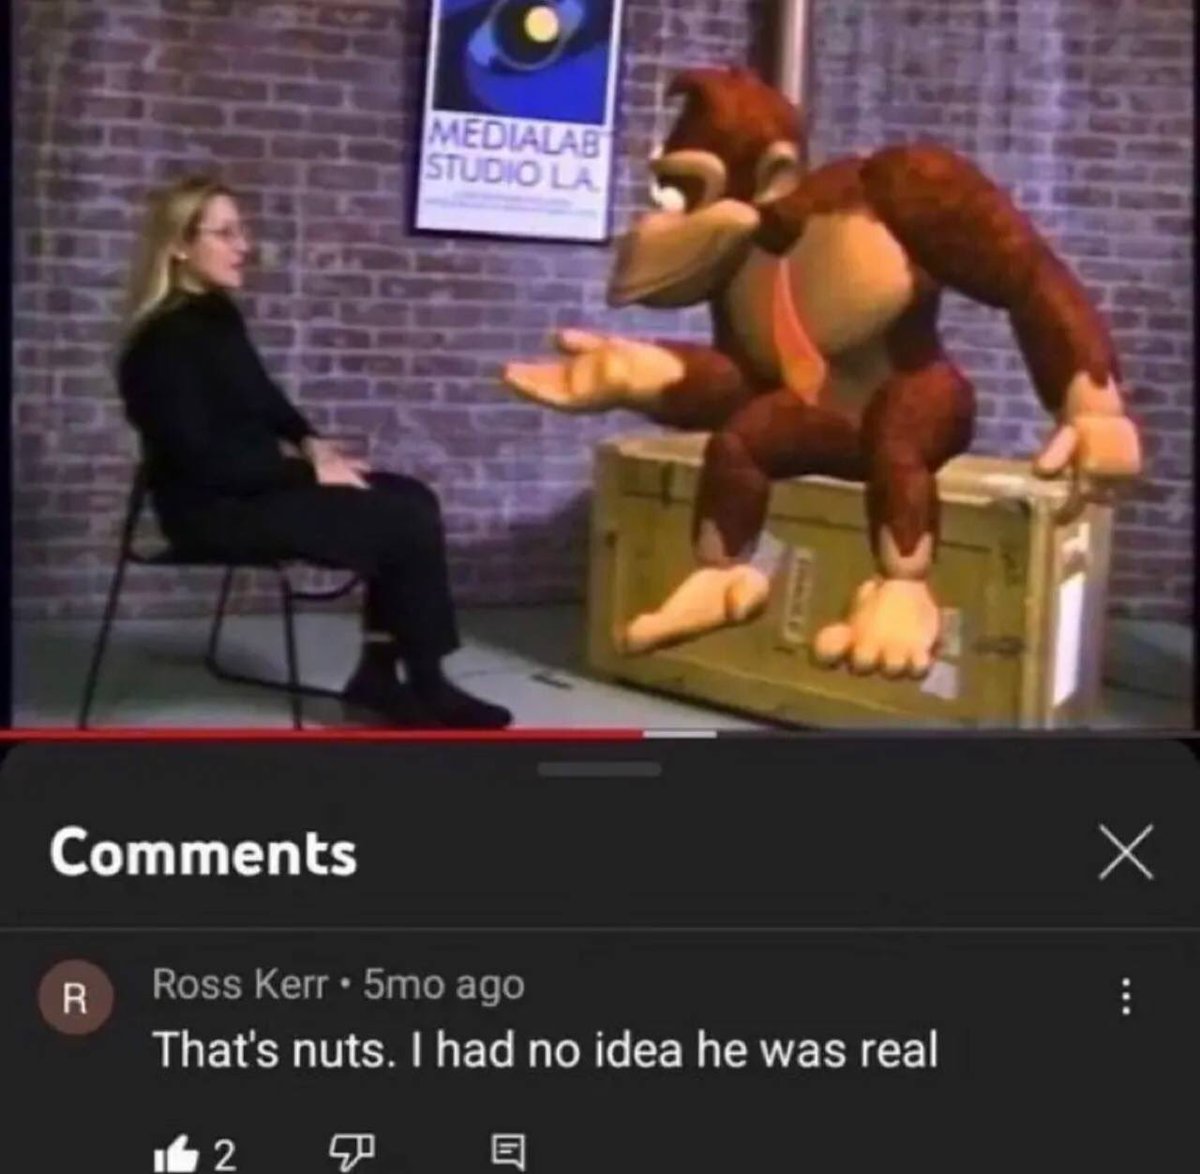 funny and savage youtube comments - donkey kong meme - R Medialab Studio La Ross Kerr 5mo ago That's nuts. I had no idea he was real 12 x